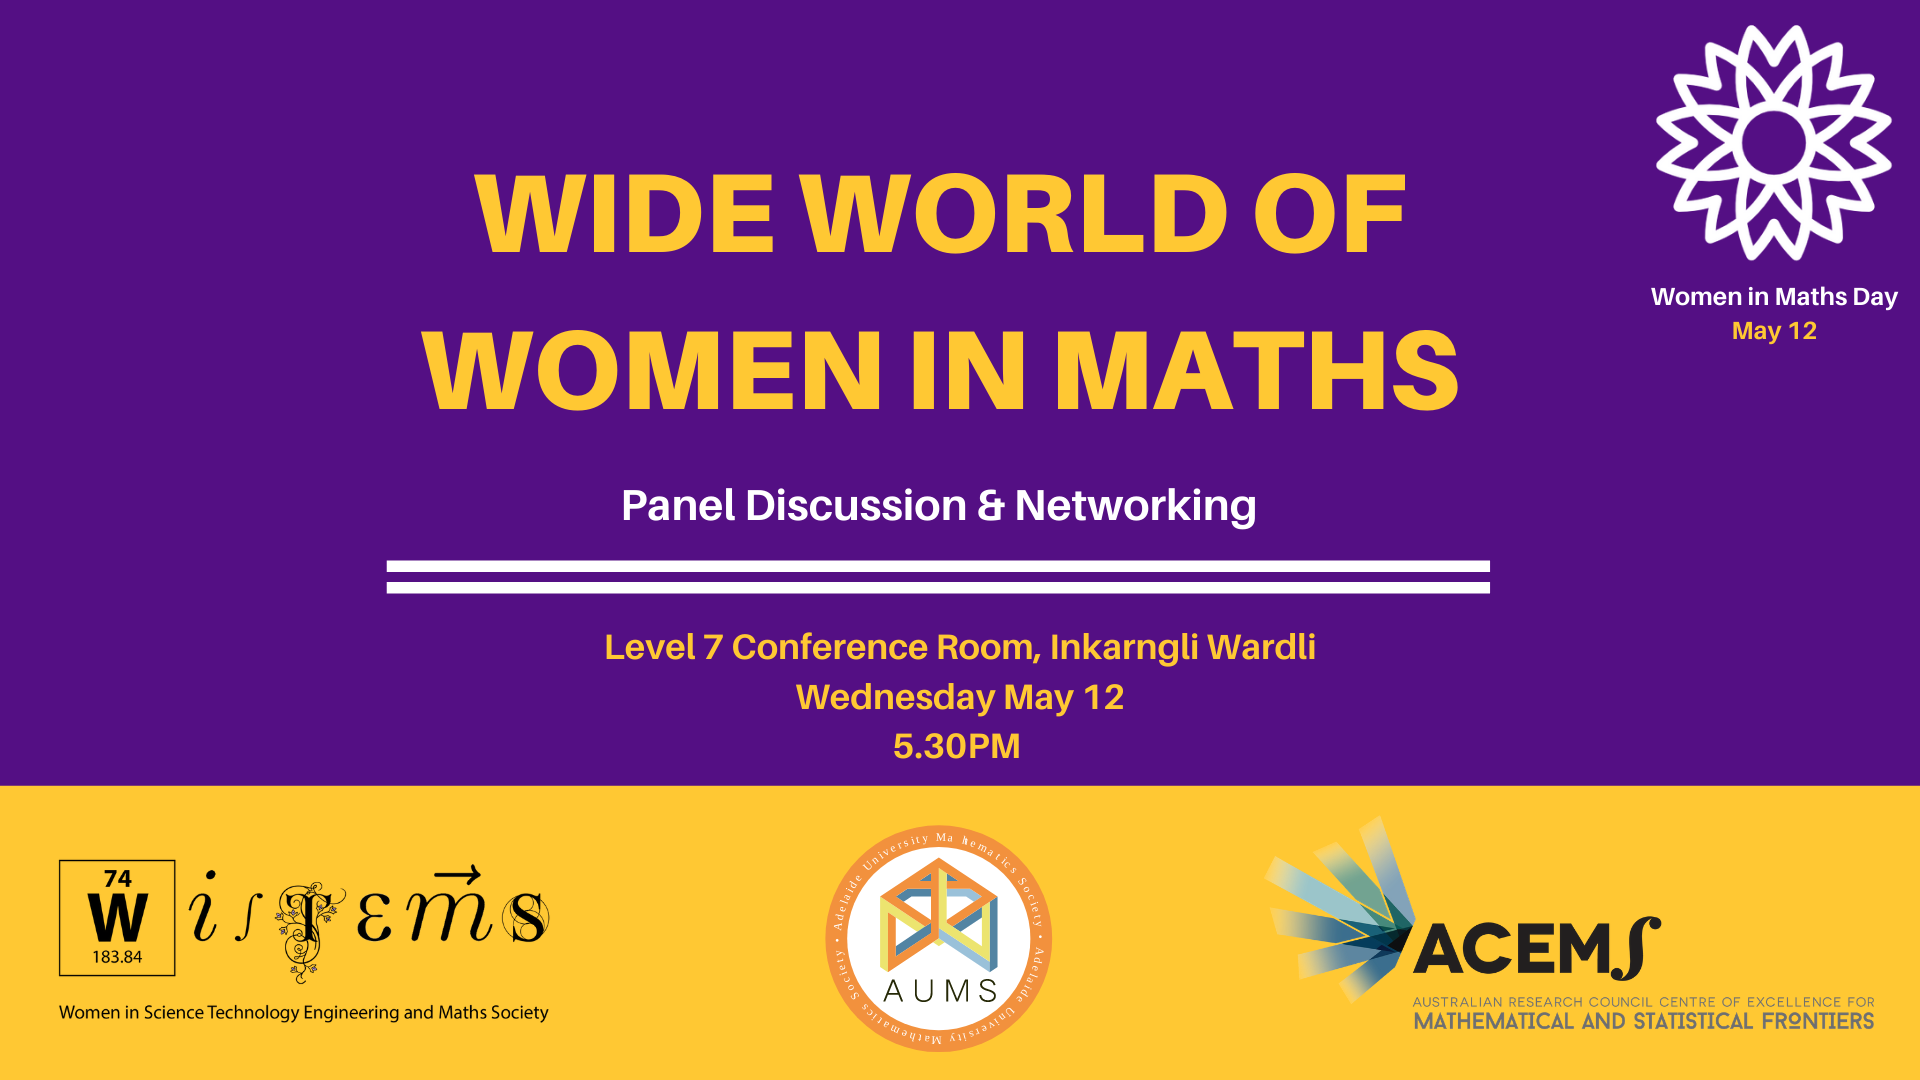 Wide World of Women in Maths Panel Discussion and NetworkingEvent 